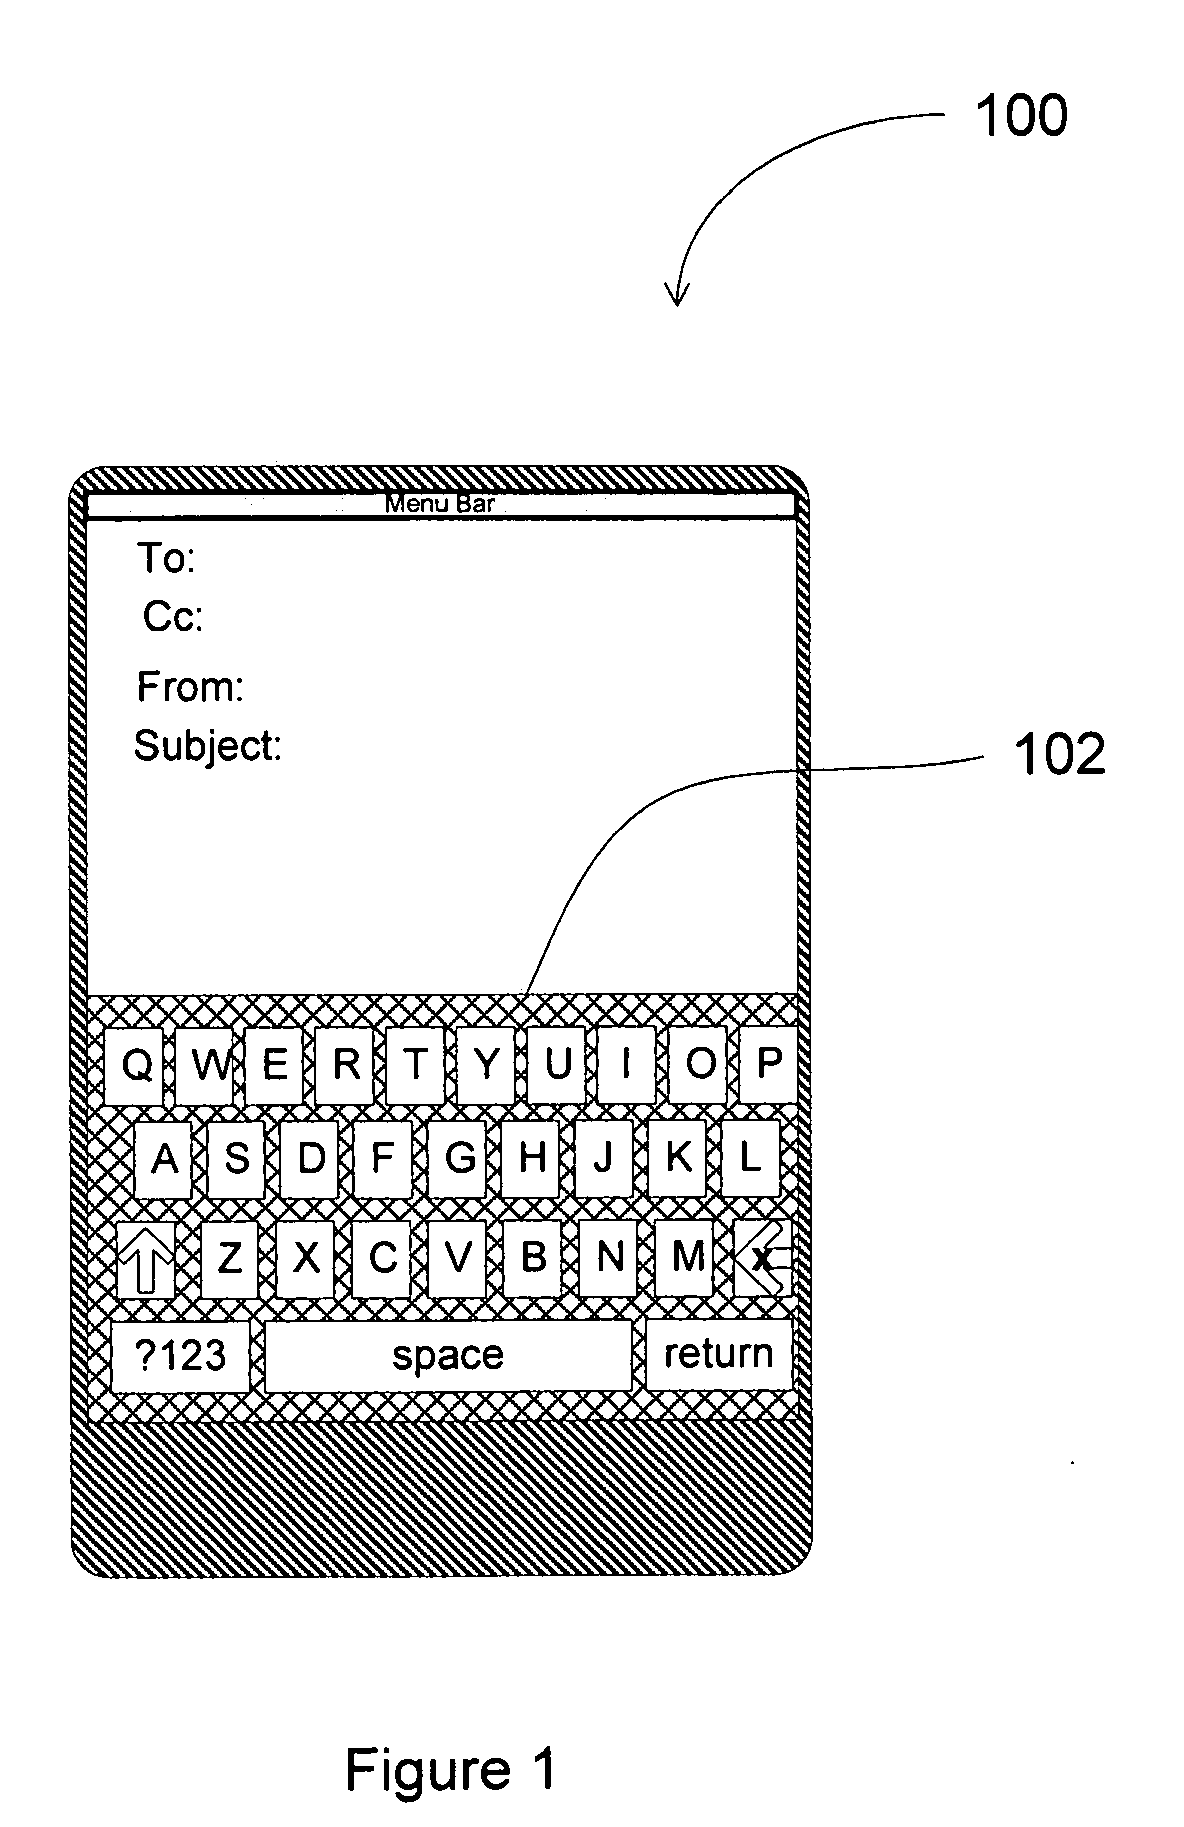 System, method and computer readable media for enabling a user to quickly identify and select a key on a touch screen keypad by easing key selection